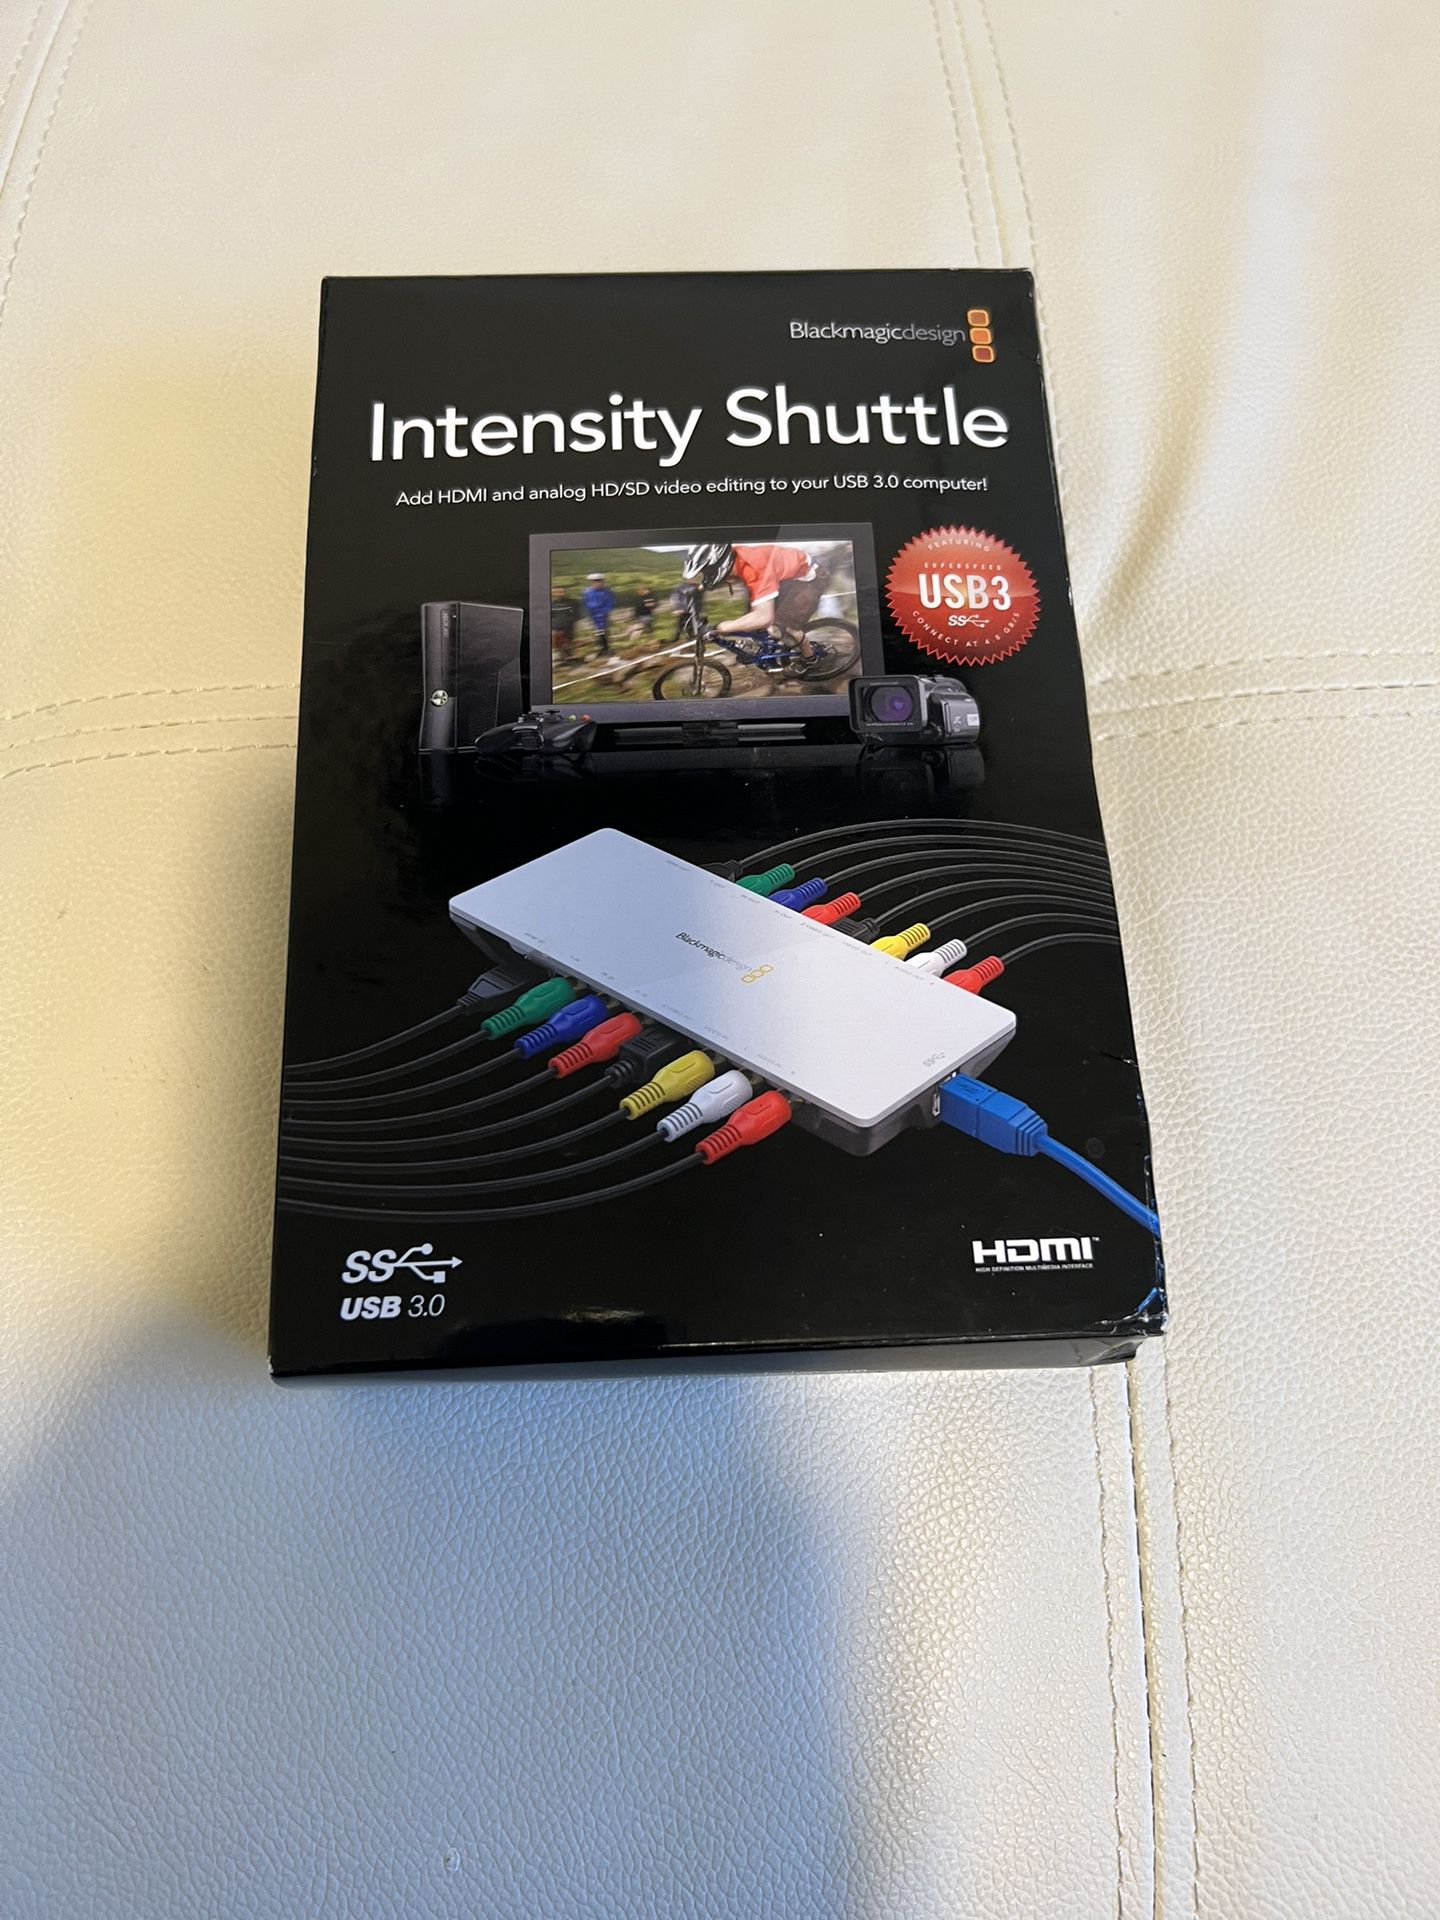 Intensity Shuttle Connecter for All your video equipment